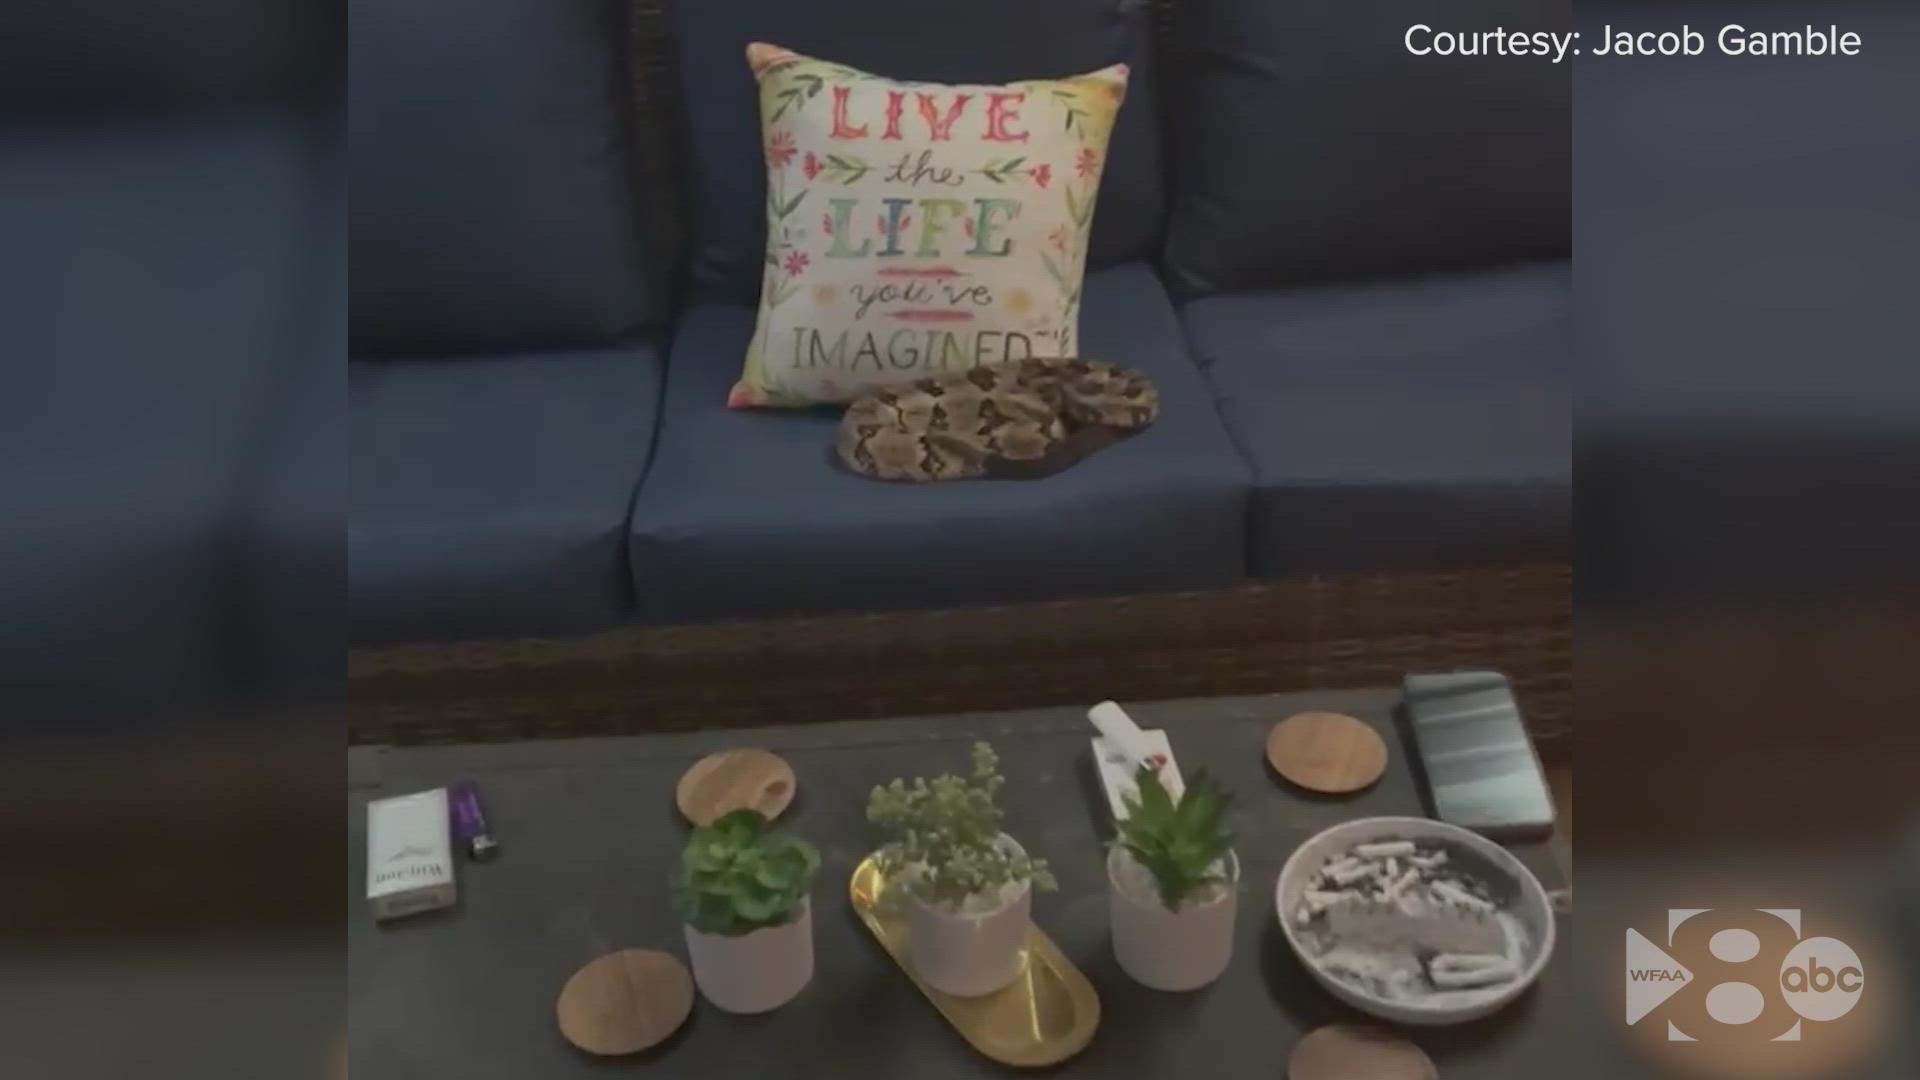 A Texas family was sitting on the couch watching the Mavericks game and left for 10 minutes. When they came back, in that same spot was a coiled-up rattlesnake.